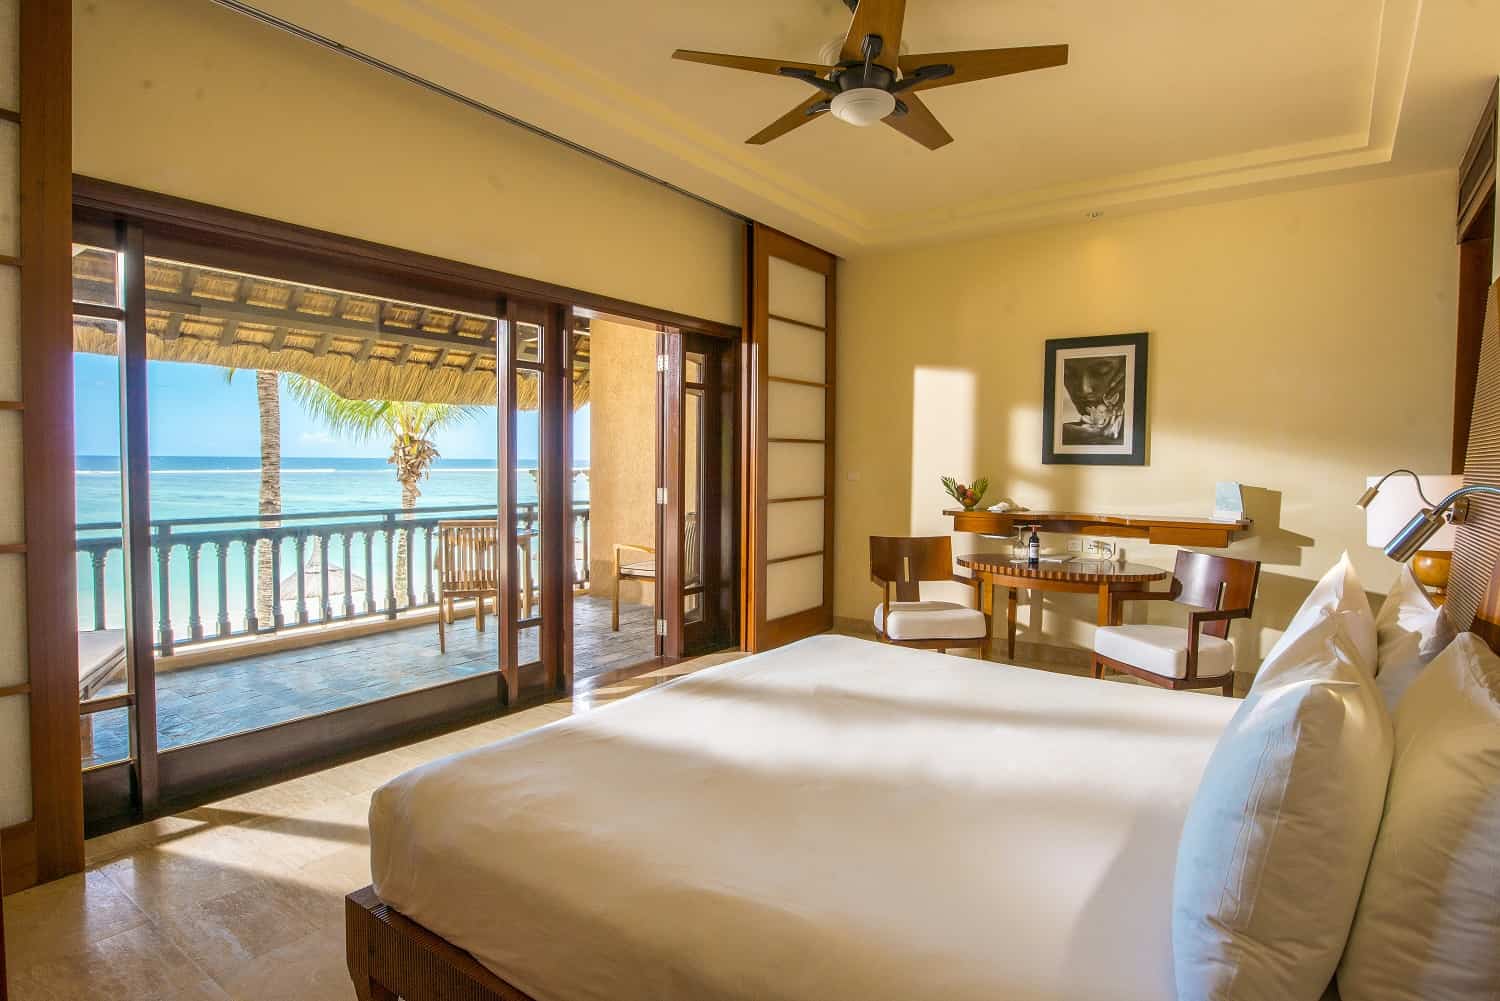 Oceanfront junior suite with balcony overlooking the ocean at Shanti Maurice Resort & Spa.